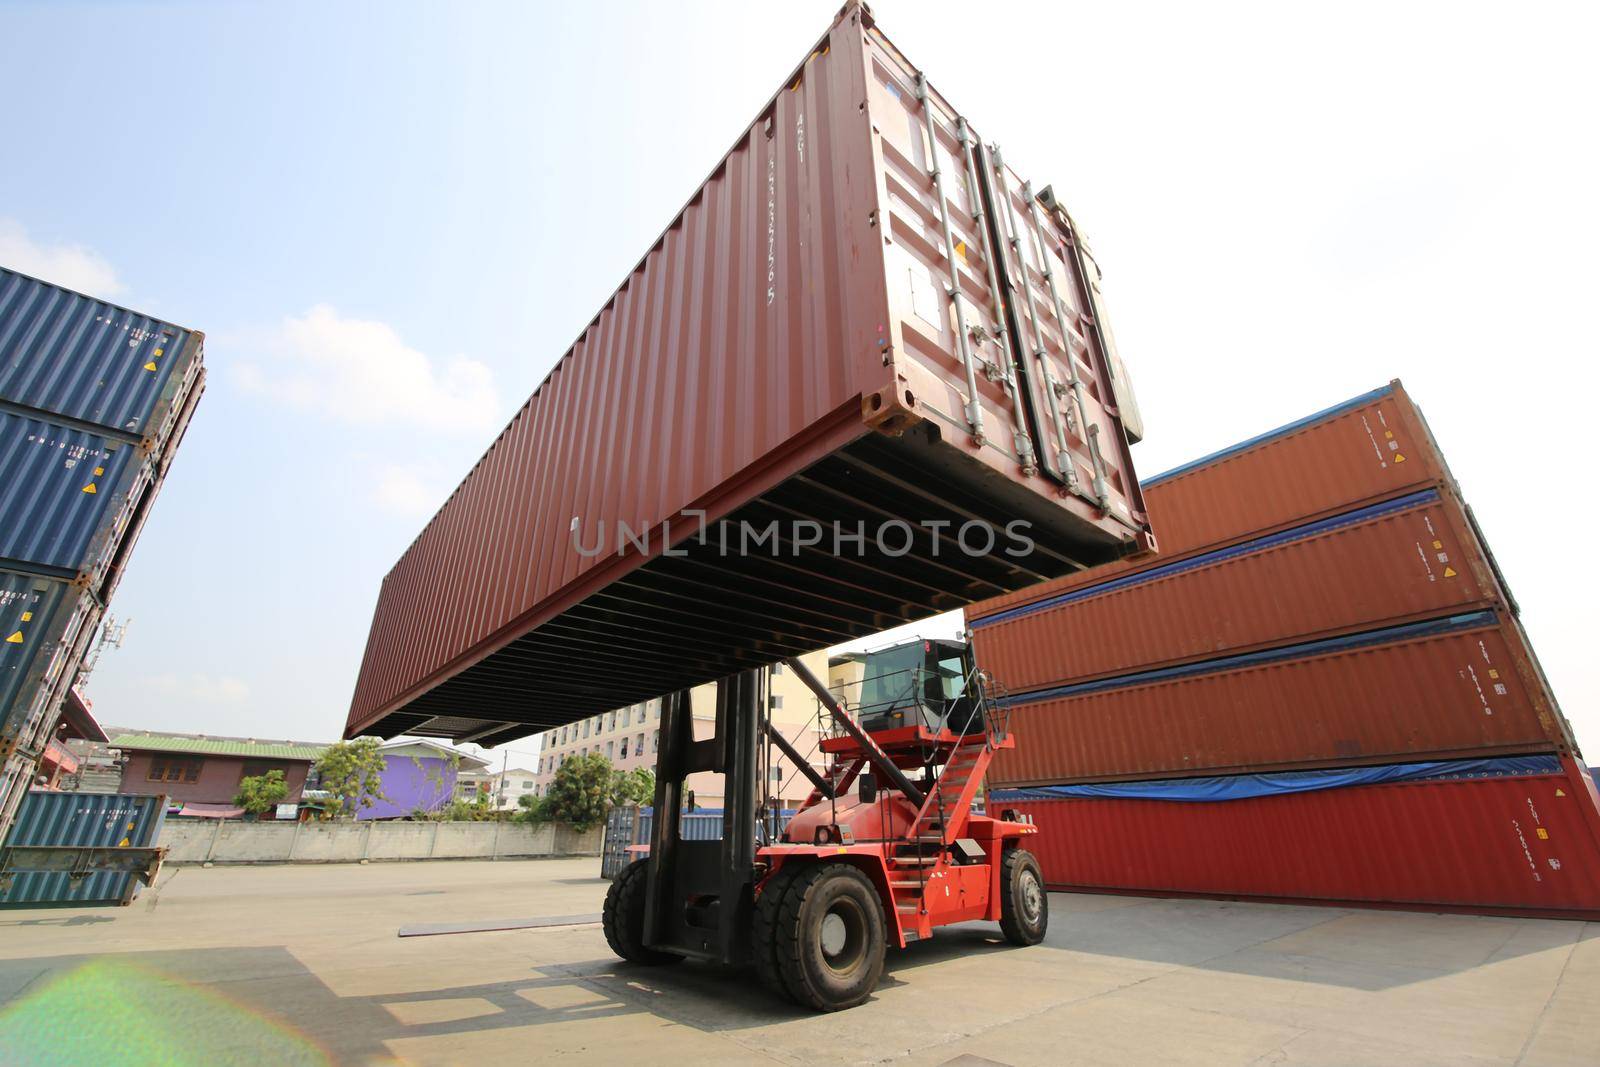 Foreman control loading Containers box from Cargo freight ship for import export. Container Warehouse Worker. by chuanchai